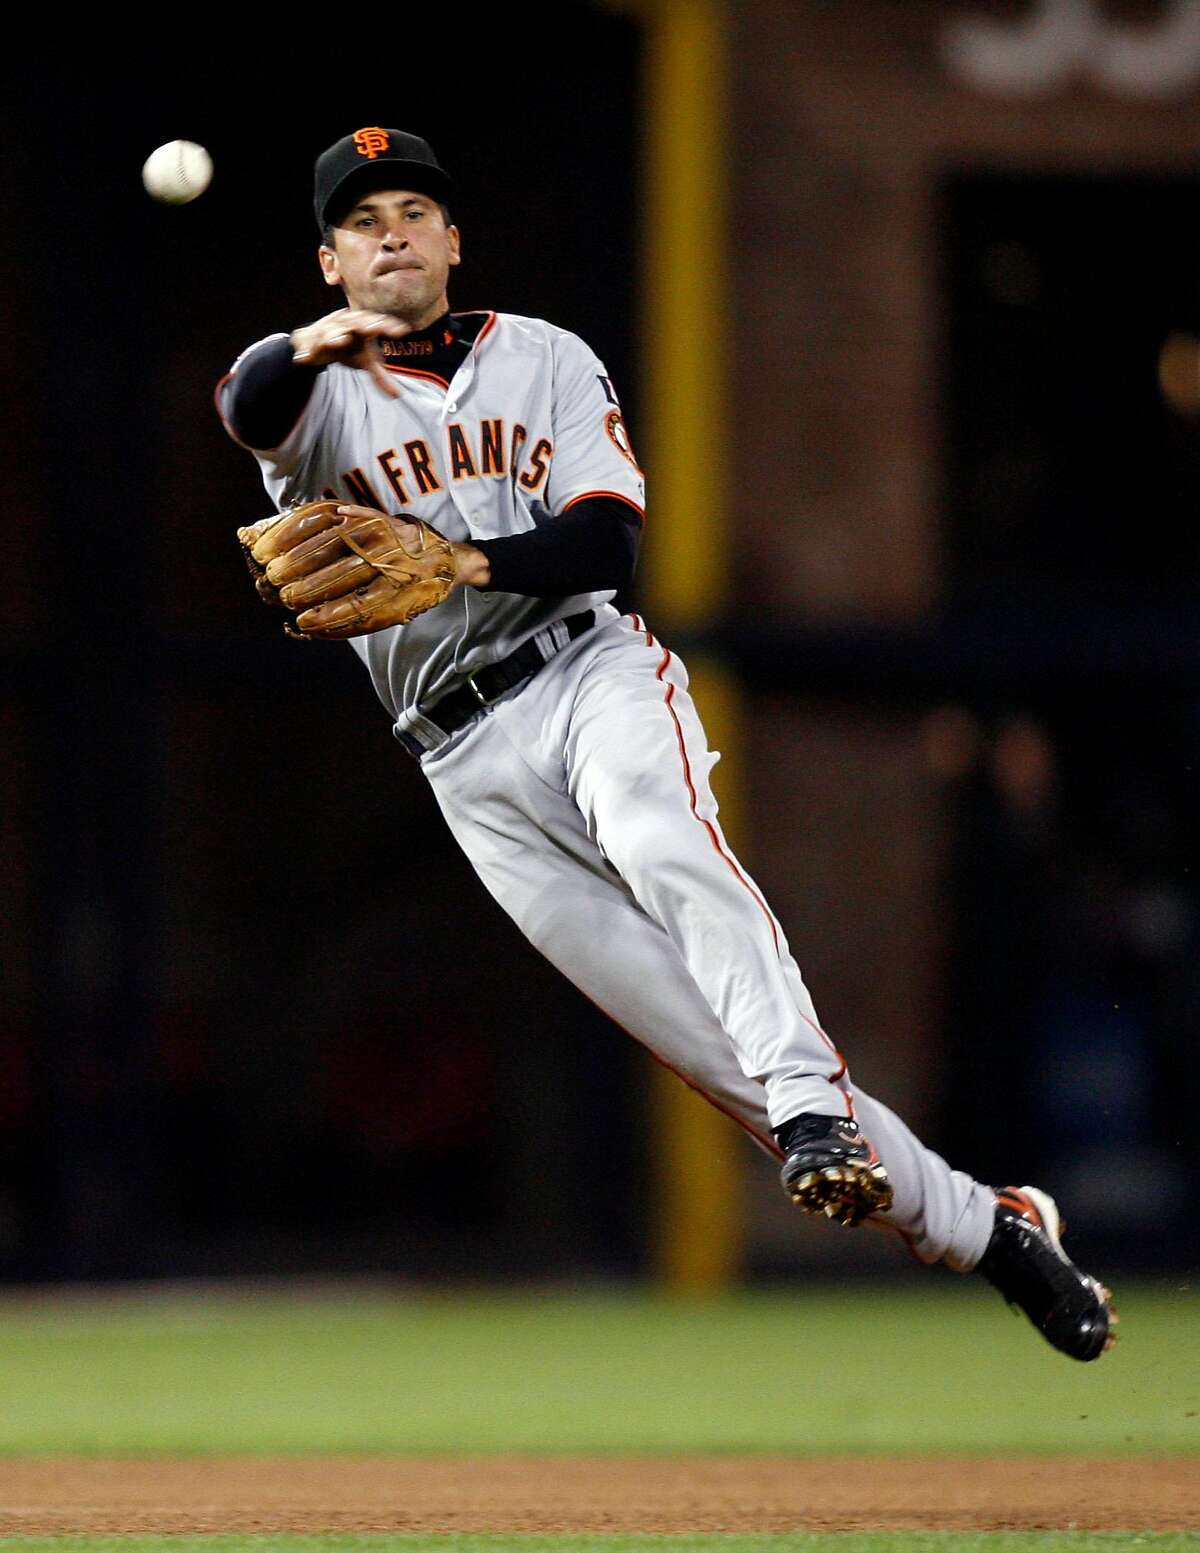 ** FILE ** In this file photo from Sept. 15, 2007, San Francisco Giants shortstop Omar Vizquel makes a leaping throw to first base to get the out on San Diego Padres' Terrmel Sledge during the sixth inning of a baseball game in San Diego. Vizquel should expect quite a homecoming Tuesday June 24, 2008 when the Indians host his San Francisco Giants in the opener of a three-game series. The 11-time Gold Glove winner, who broke Luis Aparicio's major league record for most games played at SS on May 30, returns to Cleveland for the first time since signing with the Giants as a free agent on Nov. 16, 2004. (AP Photo/Denis Poroy, file)